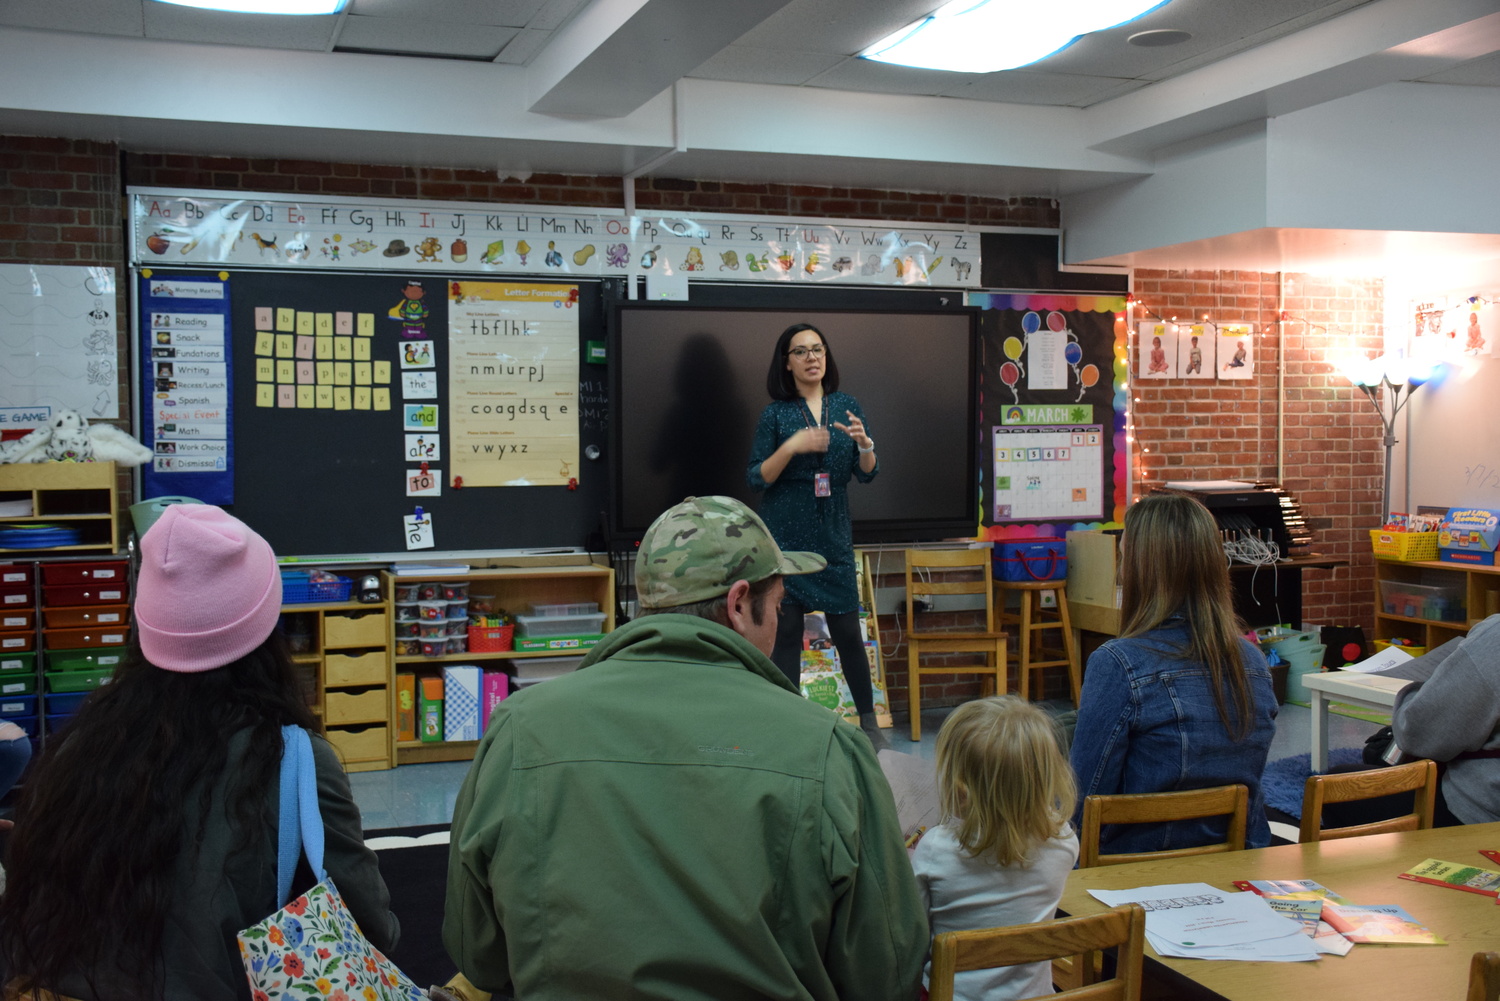 Families were recently invited to Sag Harbor Elementary school to hear all about the
transition to kindergarten and meet faculty and staff. The night included a welcome and
introductions by elementary Principal Matthew Malone and Assistant Principal Betty
Reynoso, a deep dive into a full day by kindergarten teachers, including Bianca Gorman, and teaching assistants, and classroom visits. COURTESY SAG HARBOR SCHOOL DISTRICT